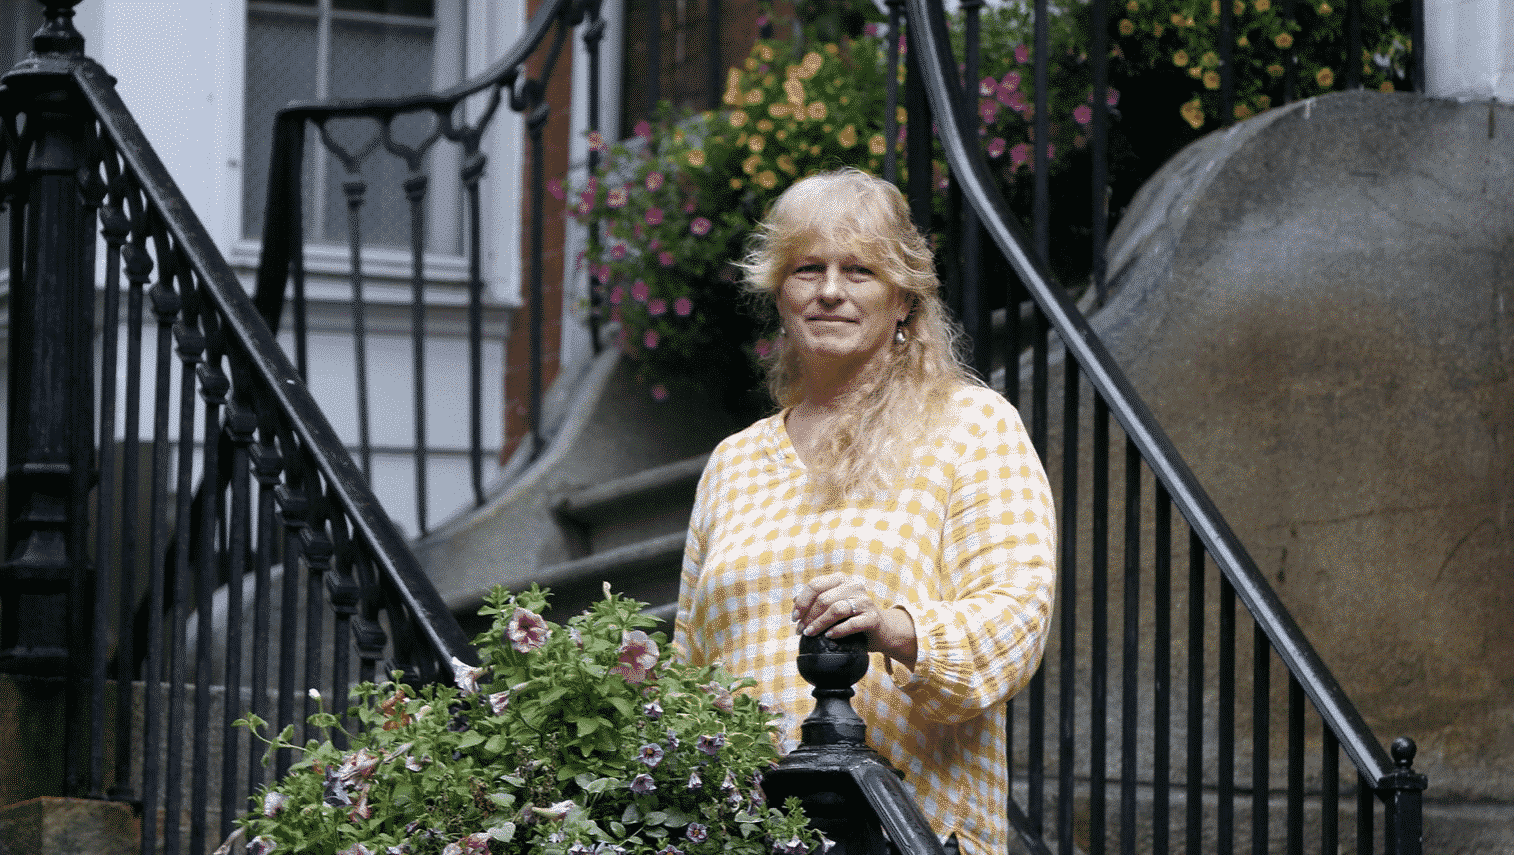 A woman wearing a yellow plaid top standing next to a beautiful flower box attached to a black iron railing.